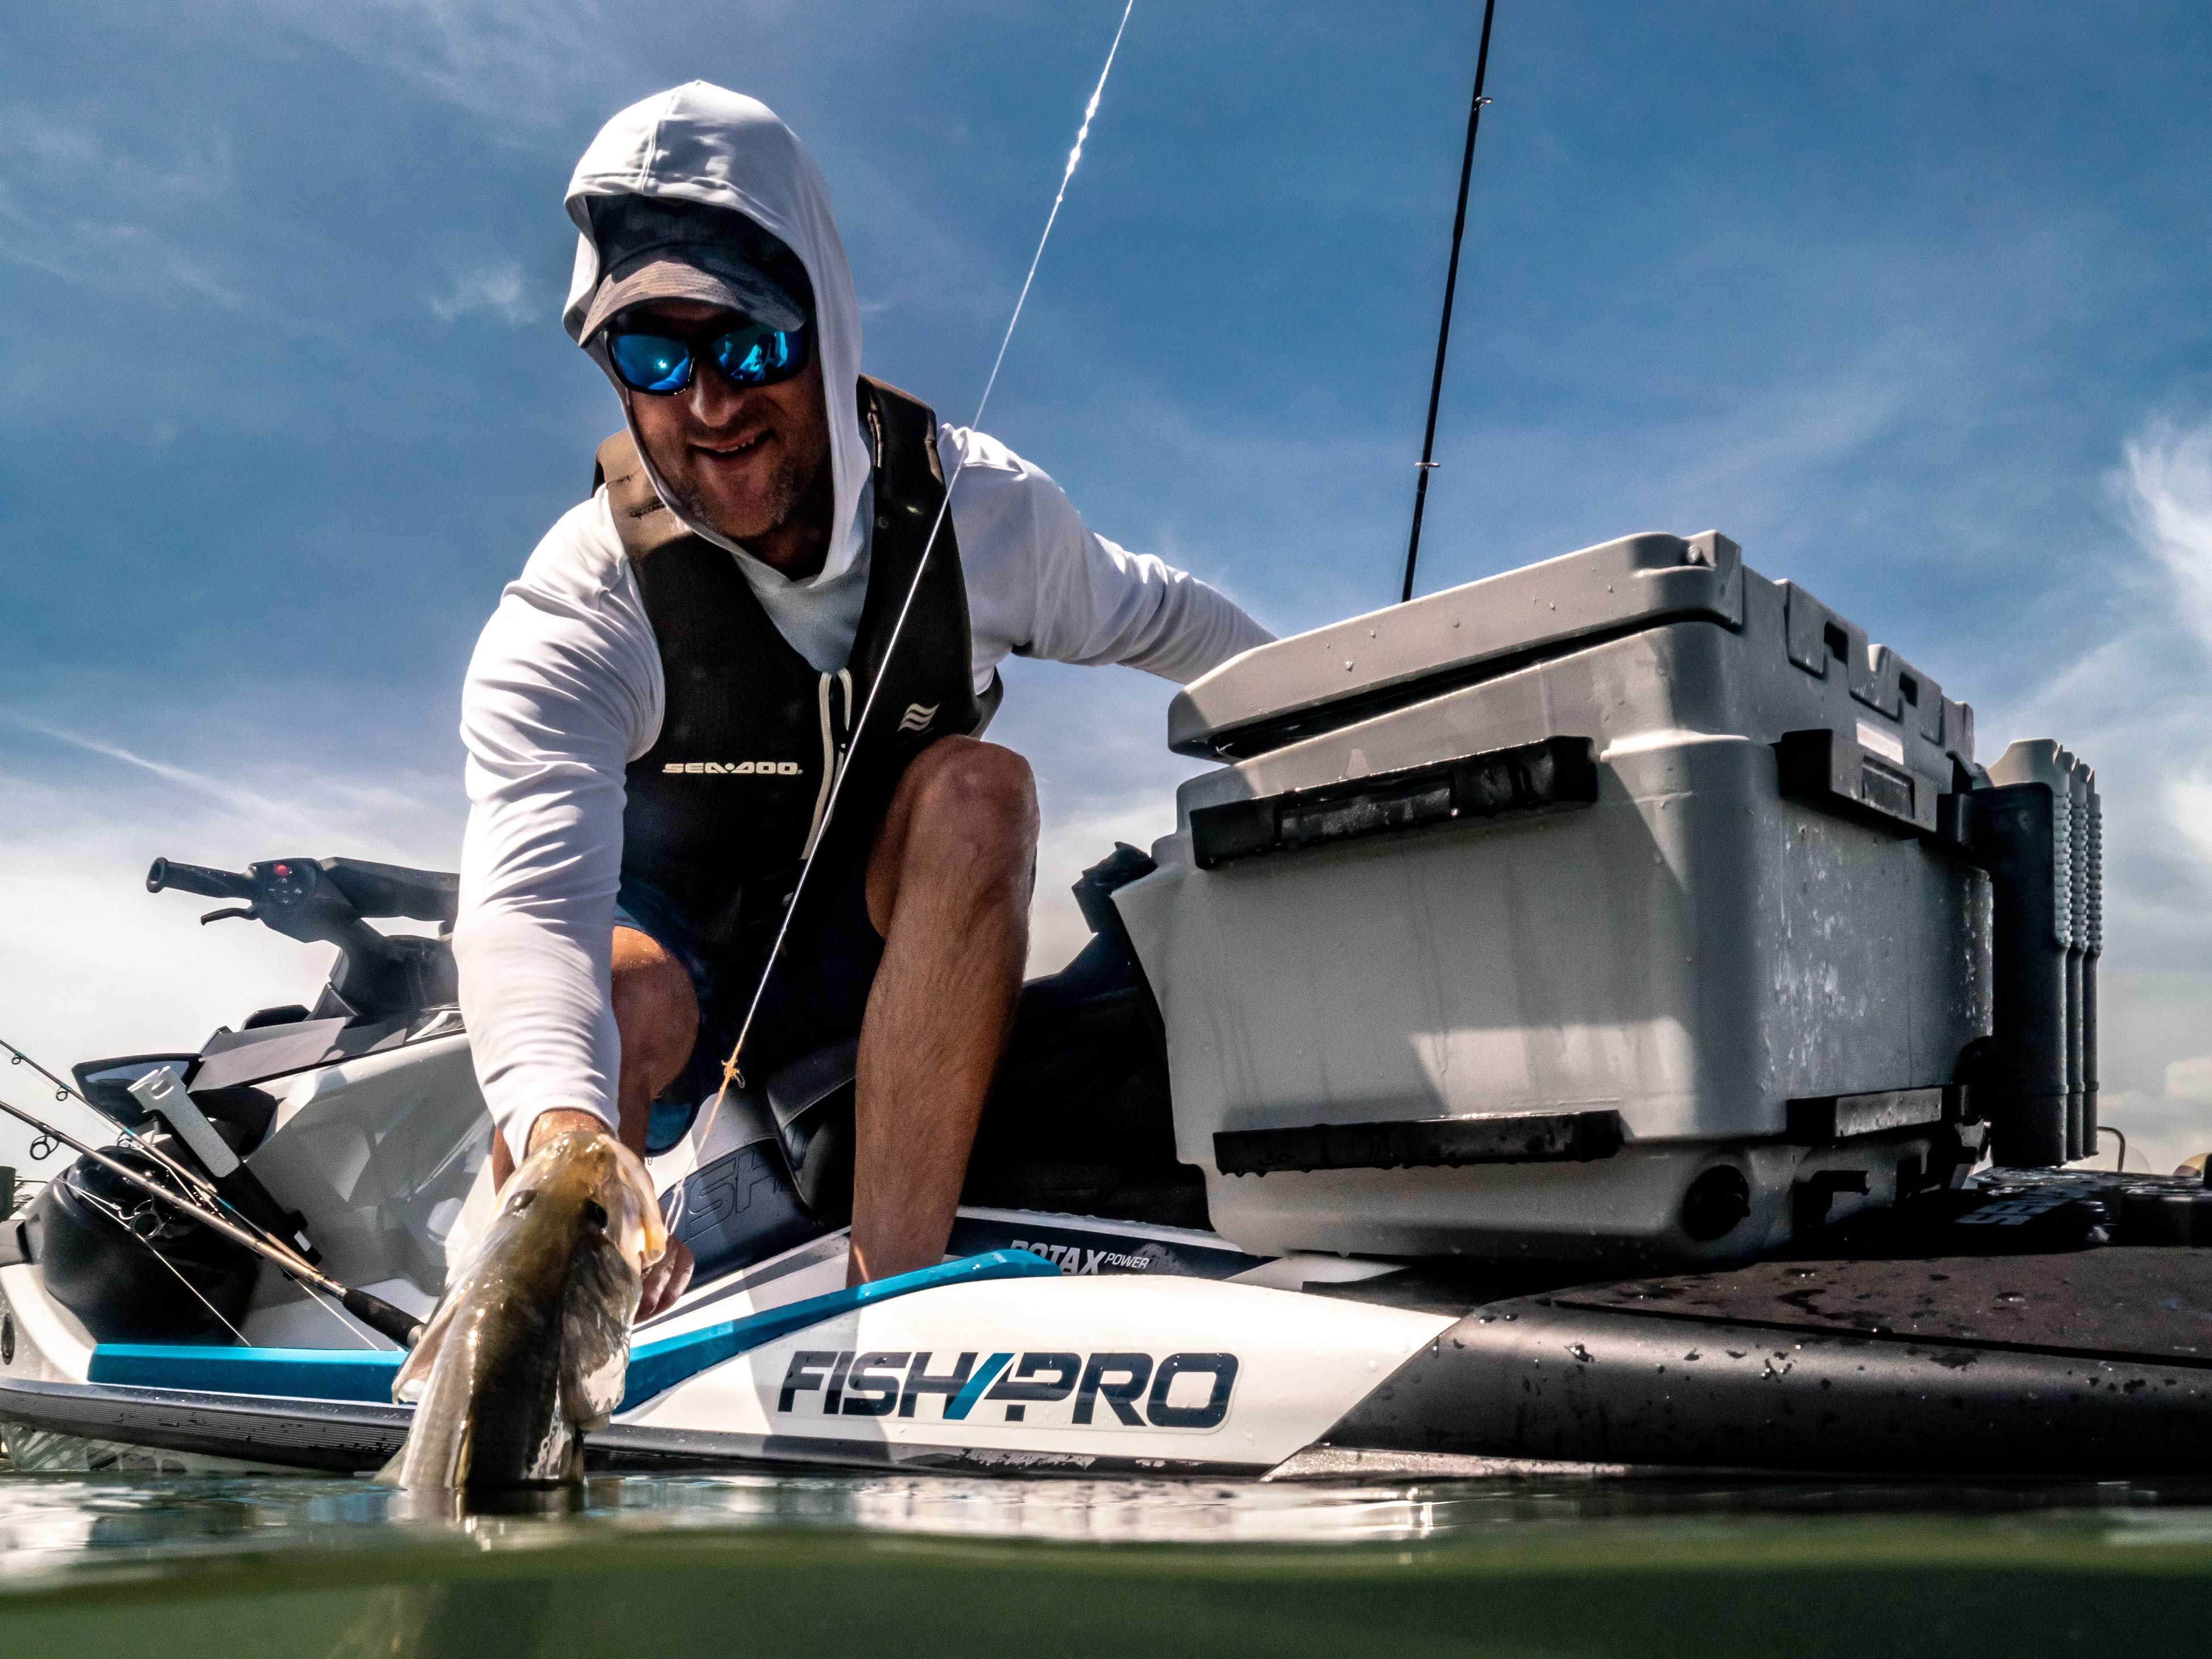 Cameron Kirkconnell catching a fish from a Sea-Doo FishPro